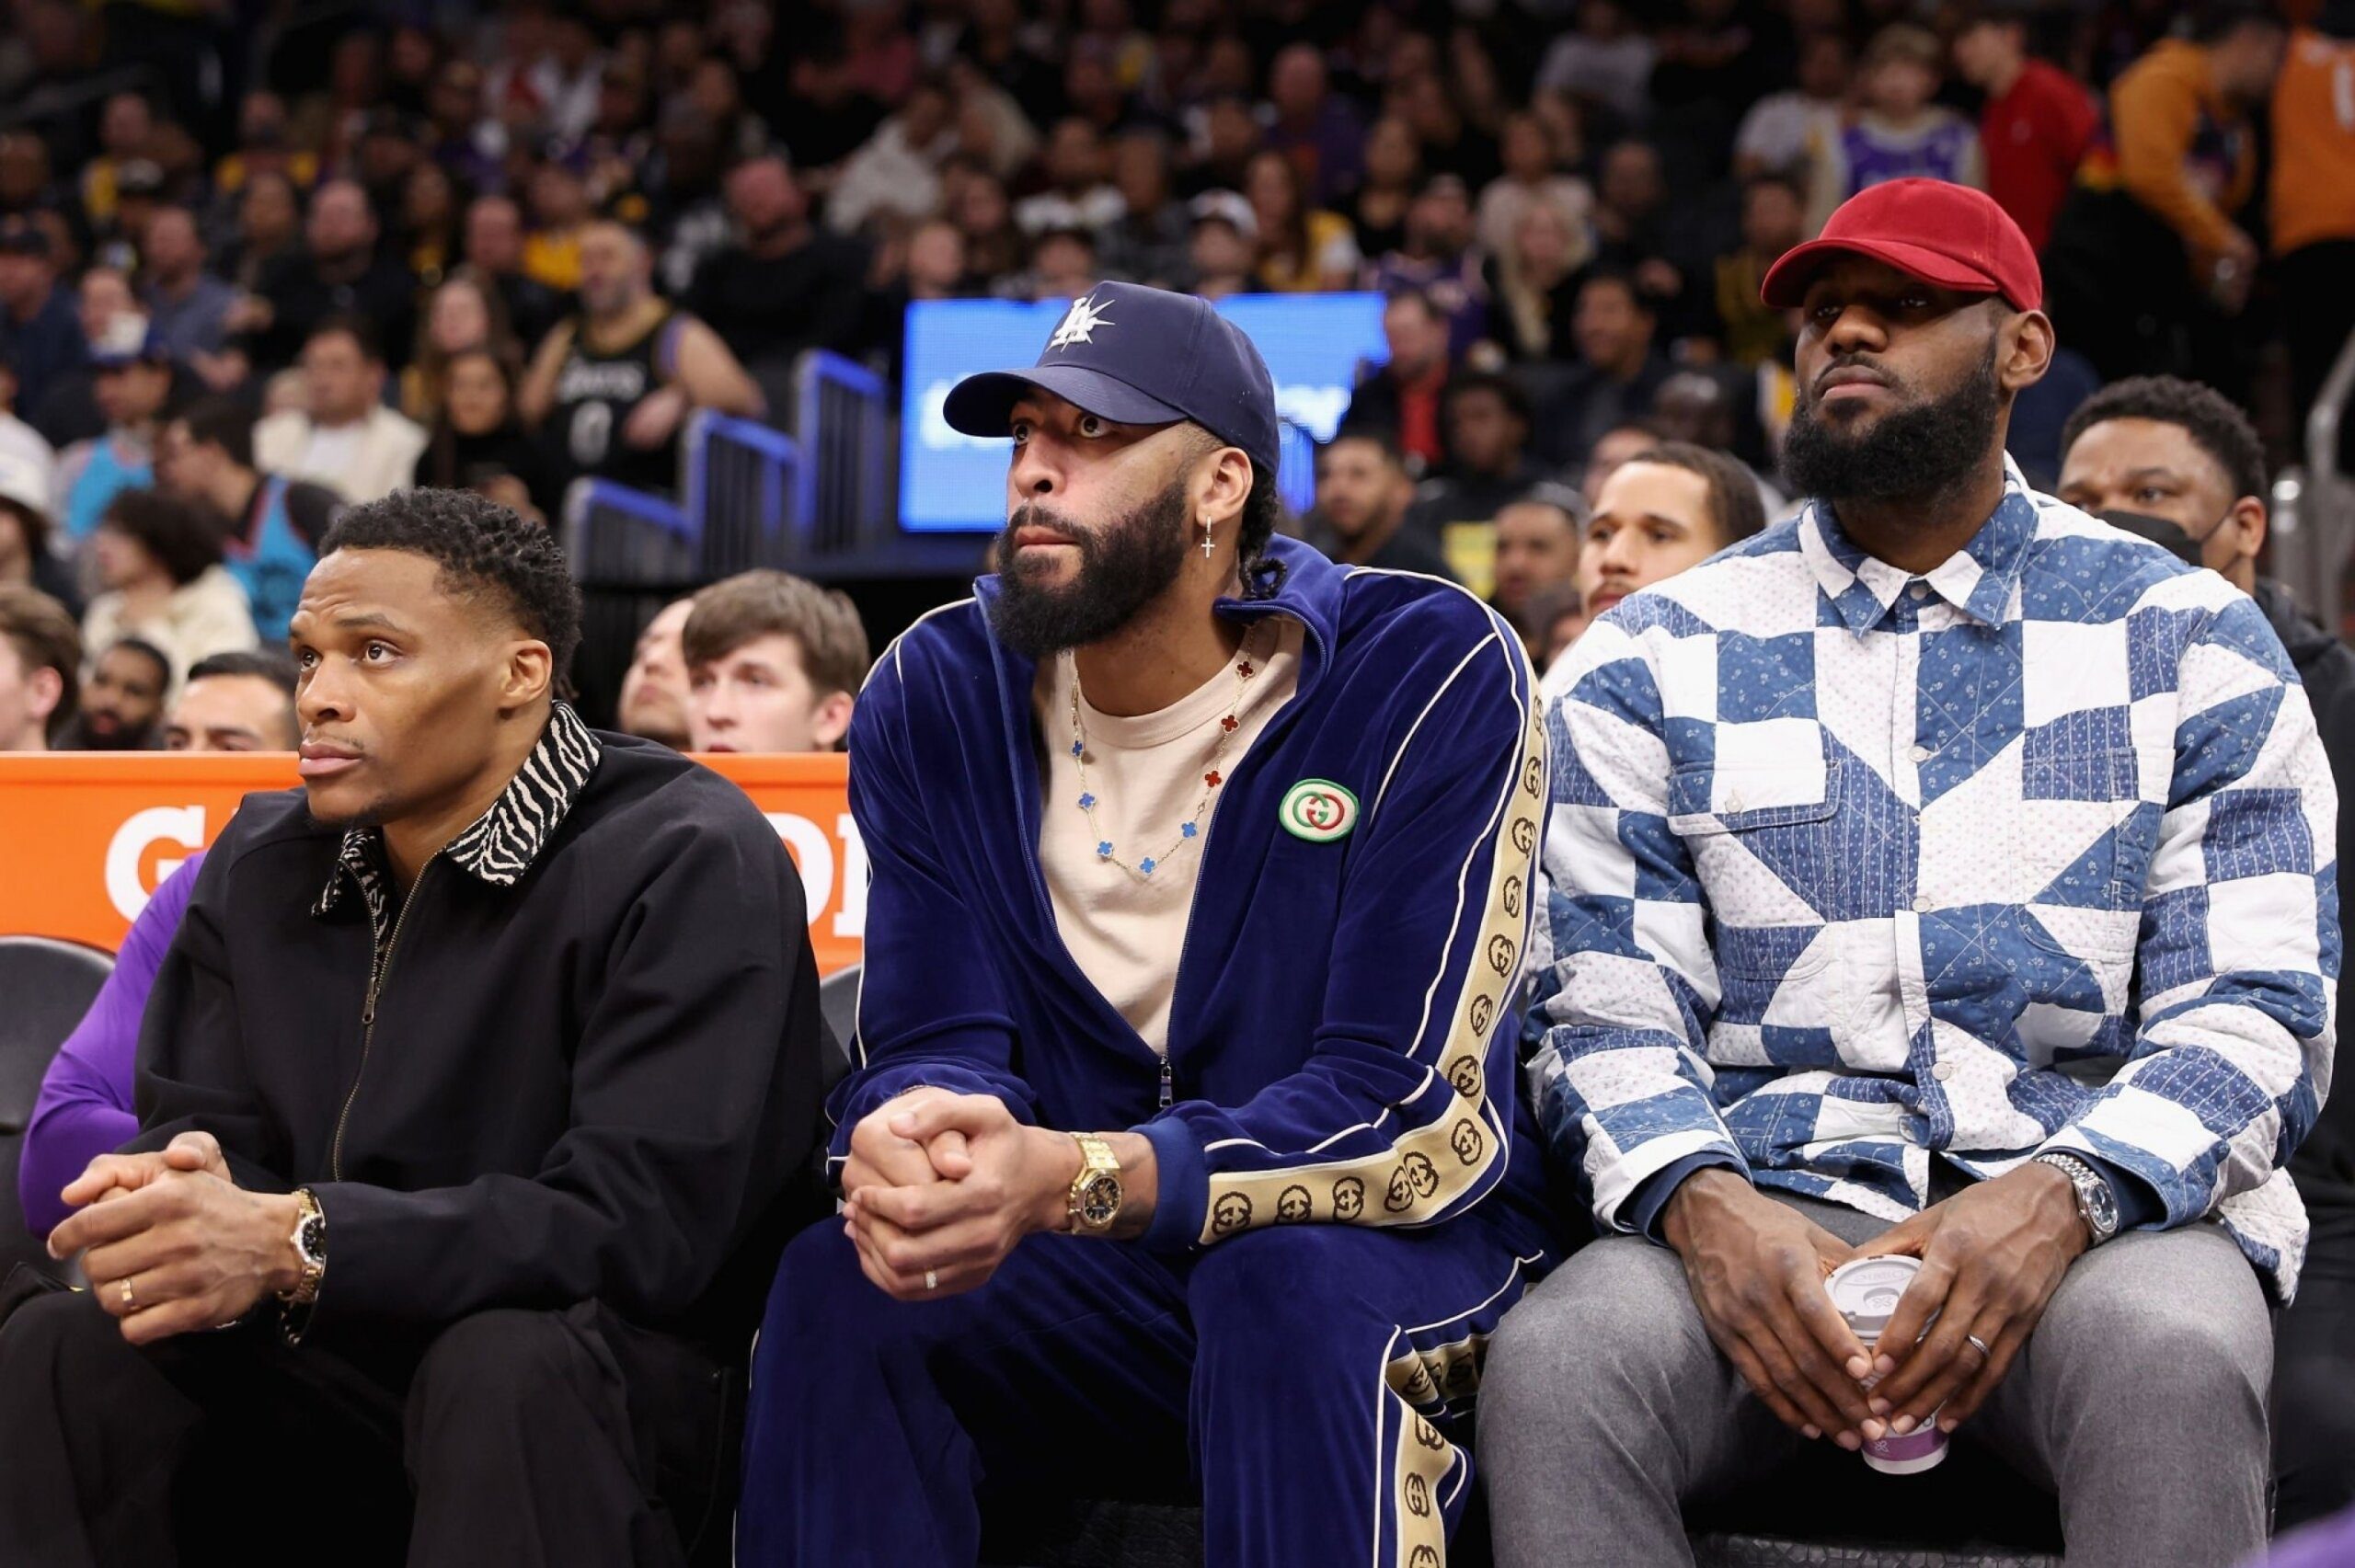 PHOENIX, ARIZONA - DECEMBER 19: Russell Westbrook #0, Anthony Davis #3 and LeBron James #6 of the Los Angeles Lakers watch from the bench during the first half of the NBA game against the Phoenix Suns at Footprint Center on December 19, 2022 in Phoenix, Arizona.